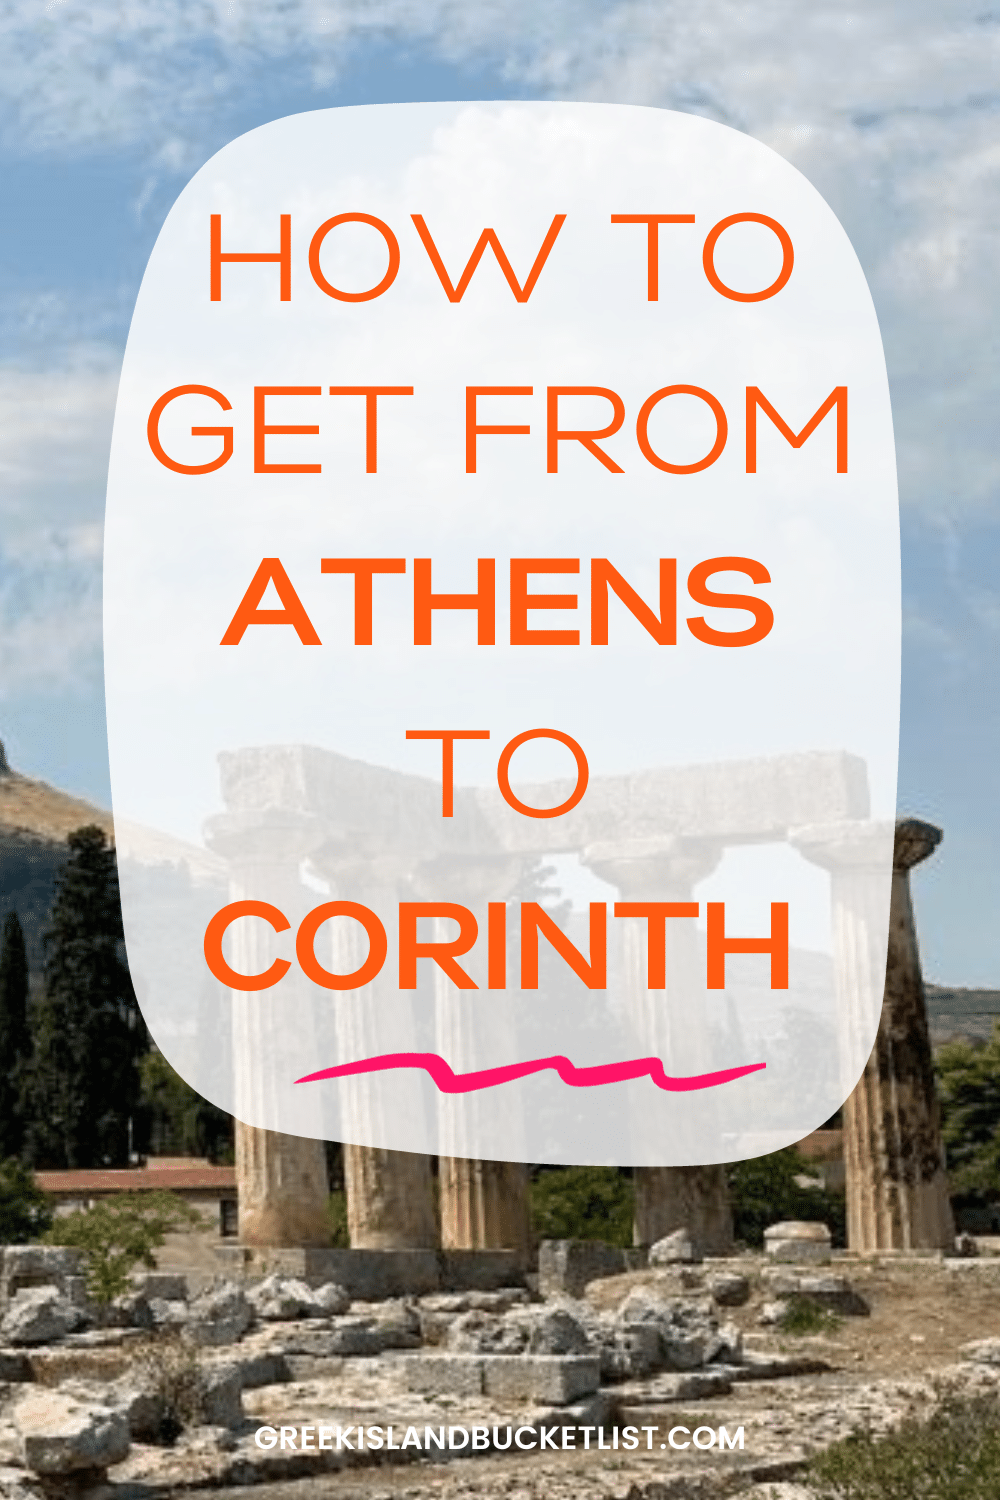 Athens to Corinth Travel: Day Trip Guide on How To Go